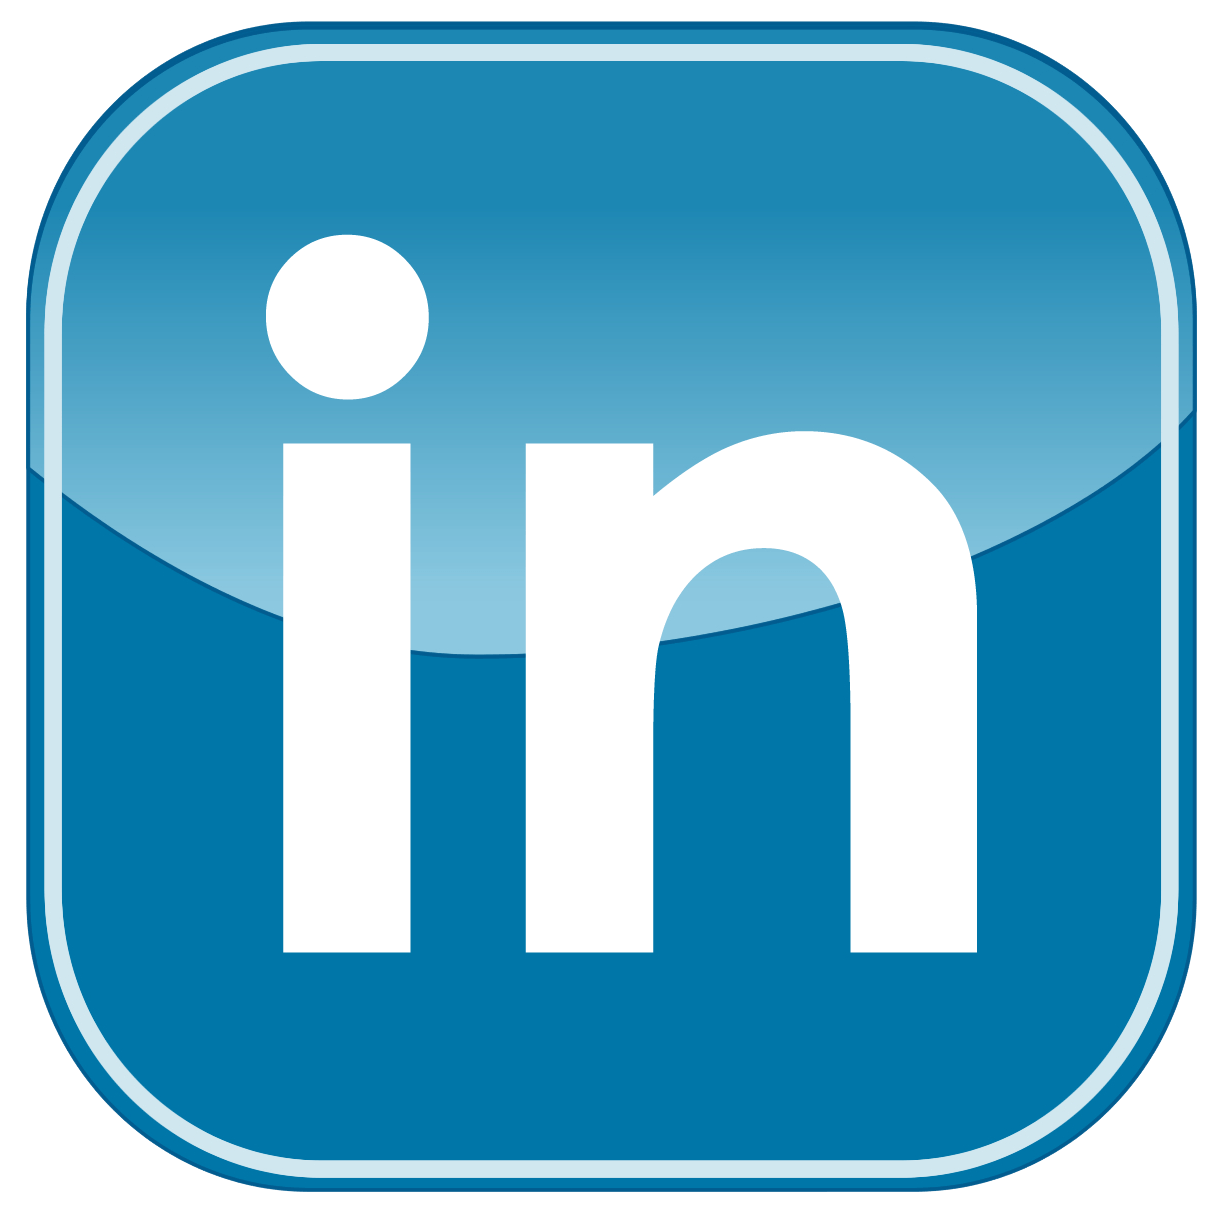 High Resolution LinkedIn Logo - Linkedin Icons No Attribution #31474 - Free Icons and PNG Backgrounds